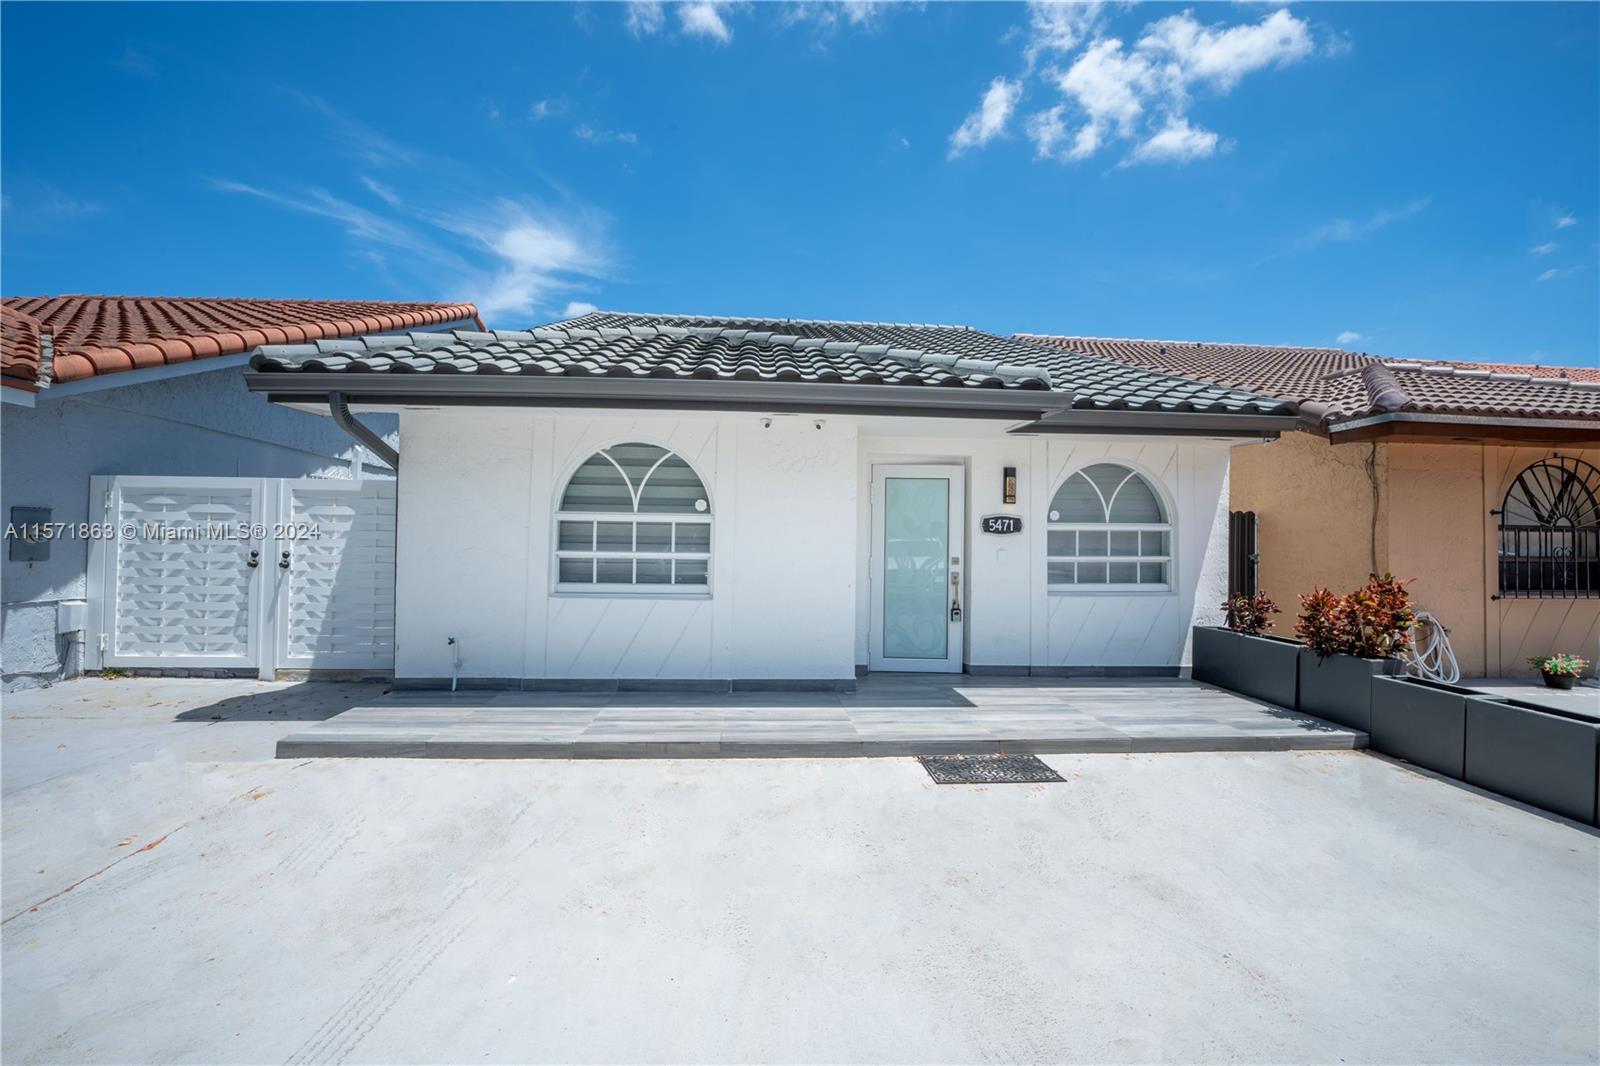 Discover your ideal retreat in Hialeah, Florida, with this charming 4-bedroom, 2-bathroom home. Feat